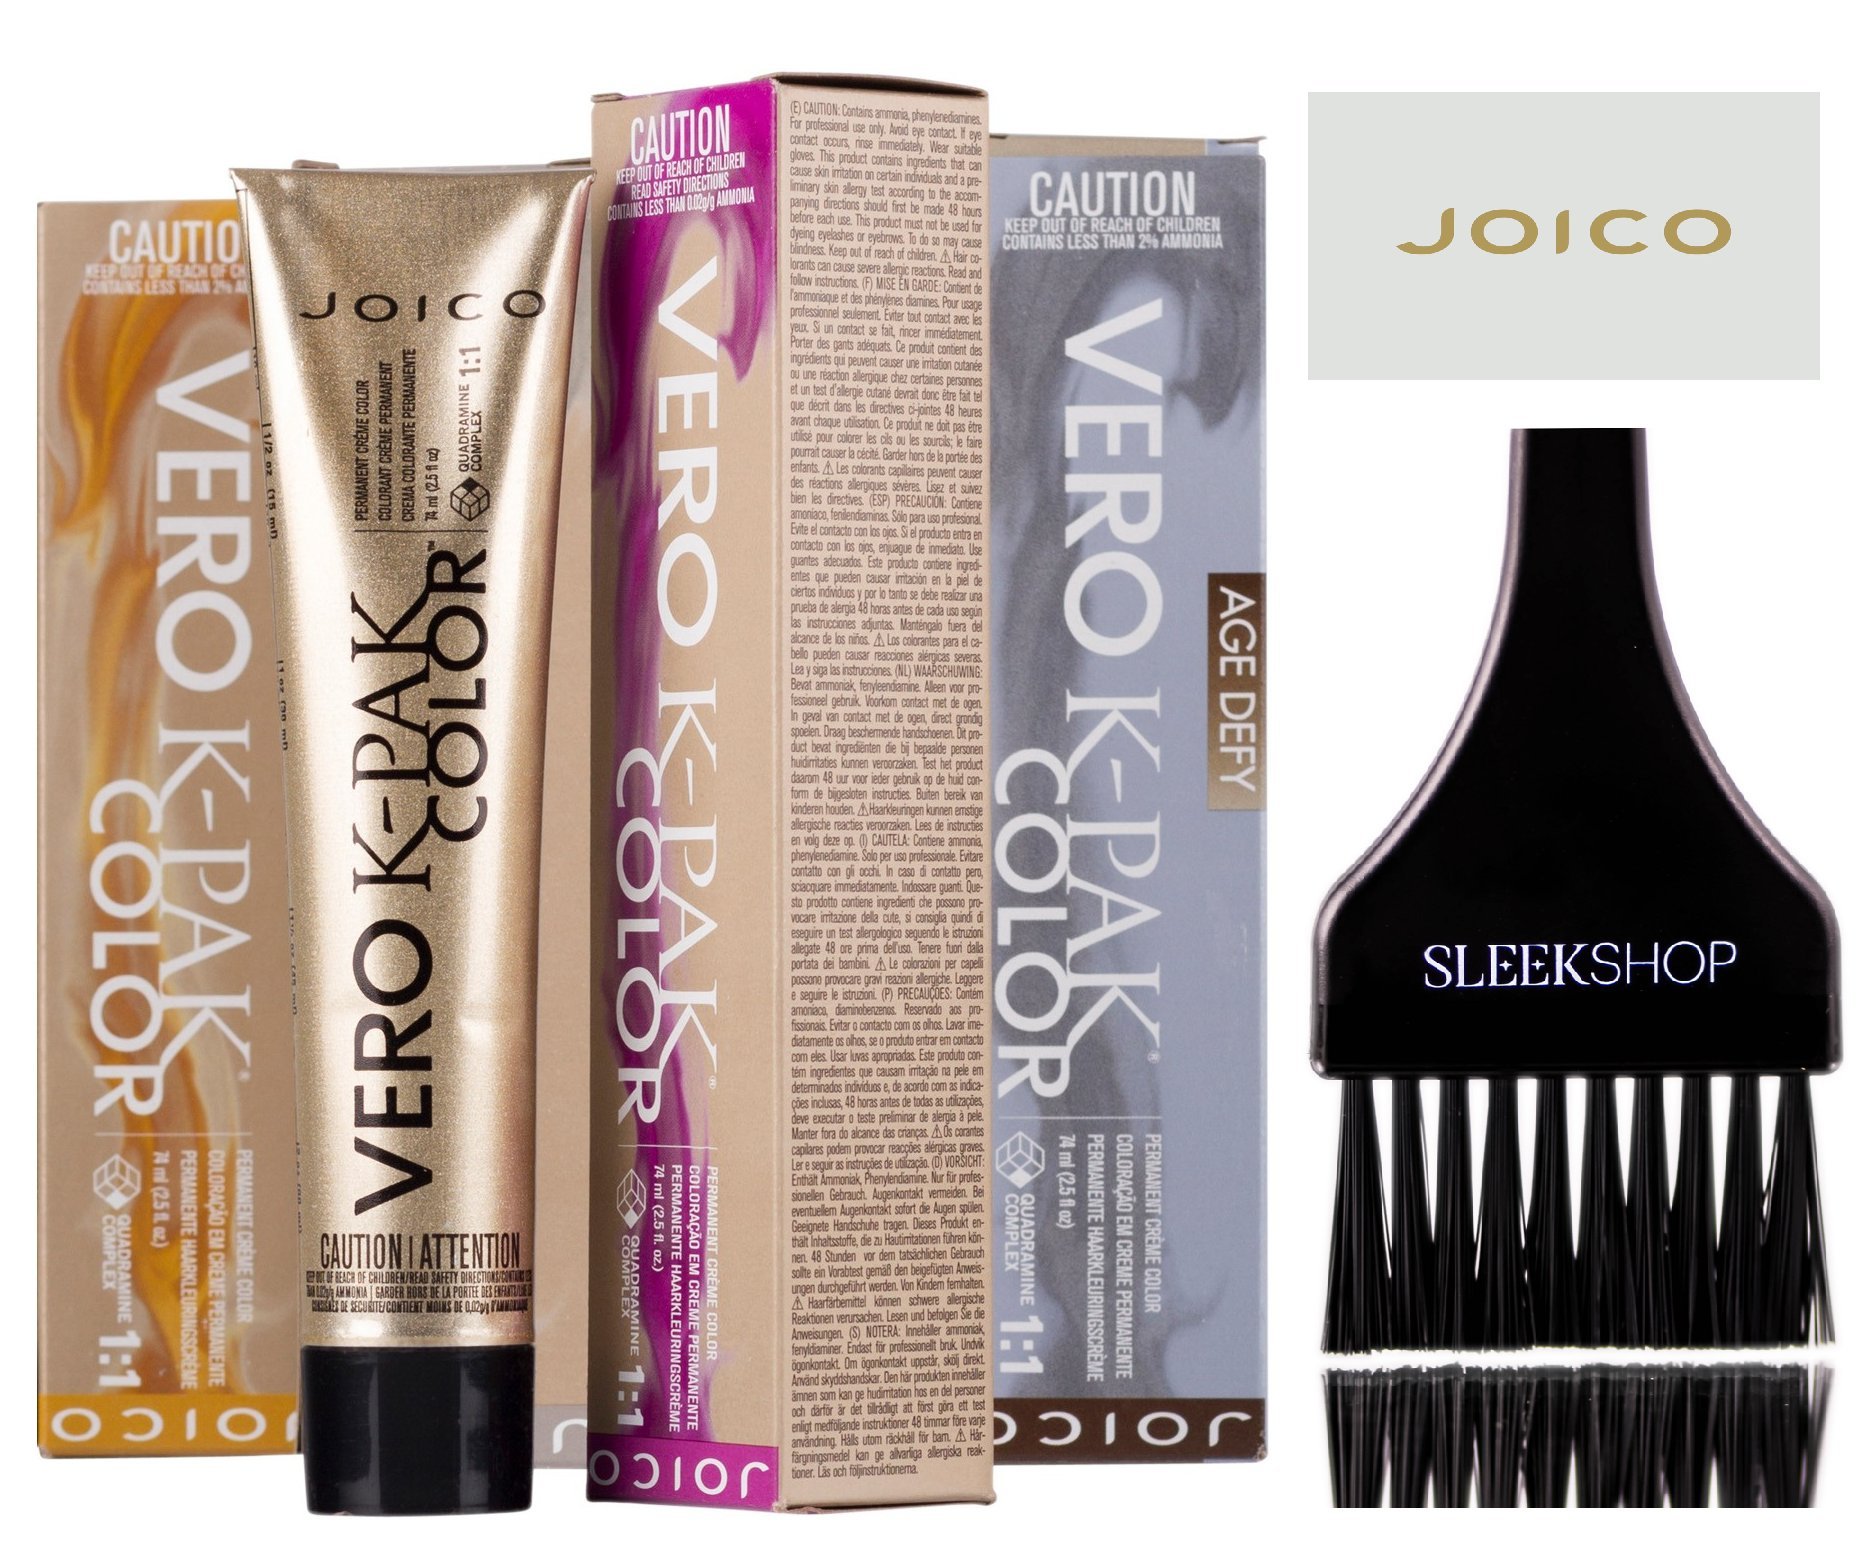 Joico VERO K-Pak Color Permanent Creme Hair Color (with Sleek Tint Brush) (TPB Pearl Blonde) - image 2 of 2